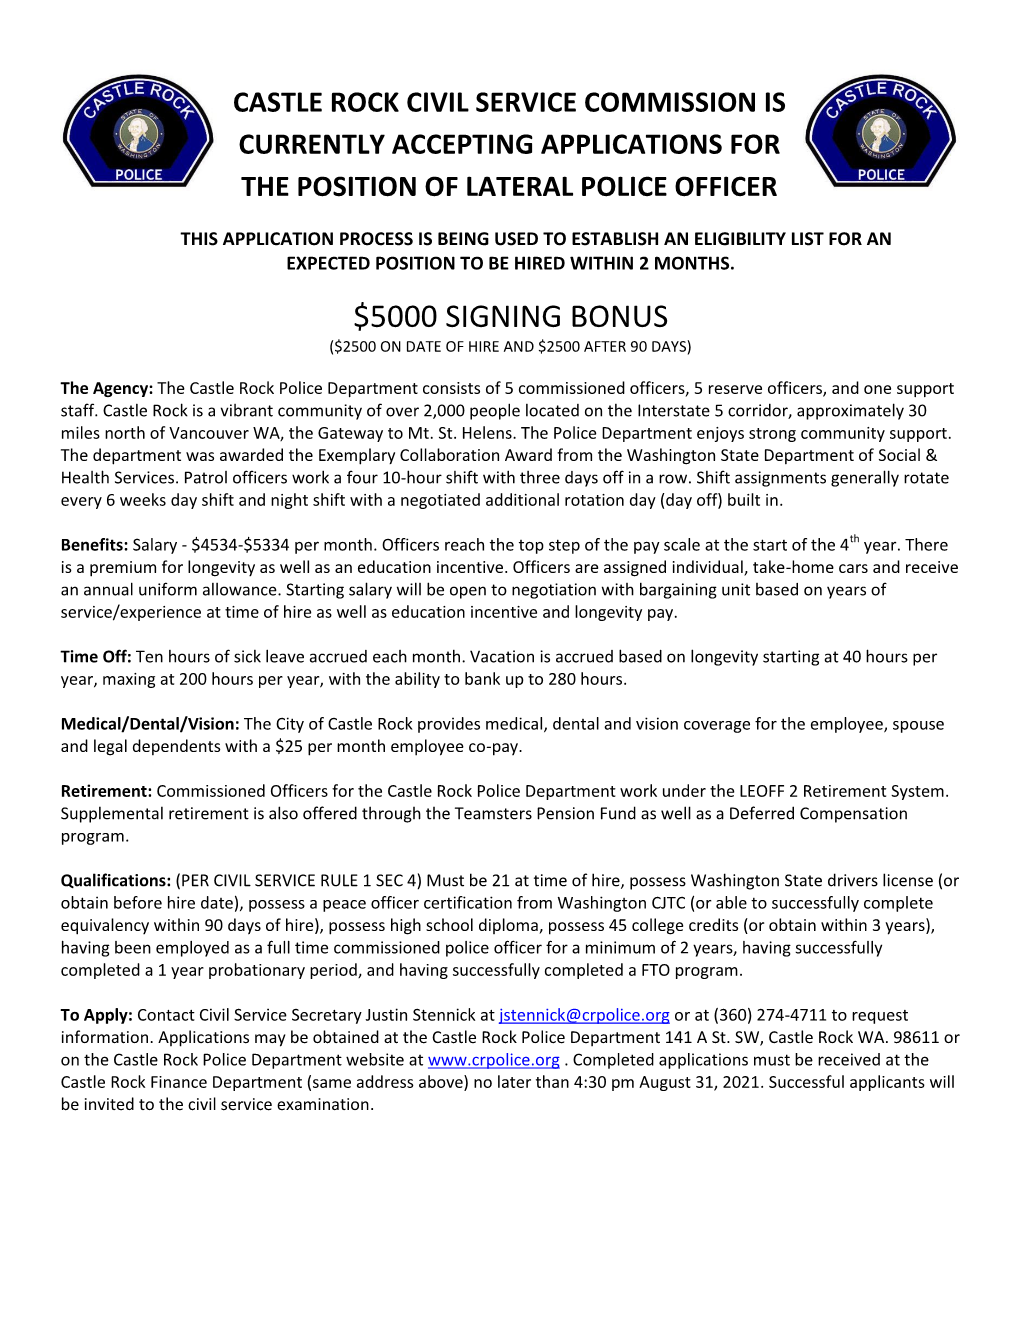 Castle Rock Civil Service Commission Is Currently Accepting Applications for the Position of Lateral Police Officer